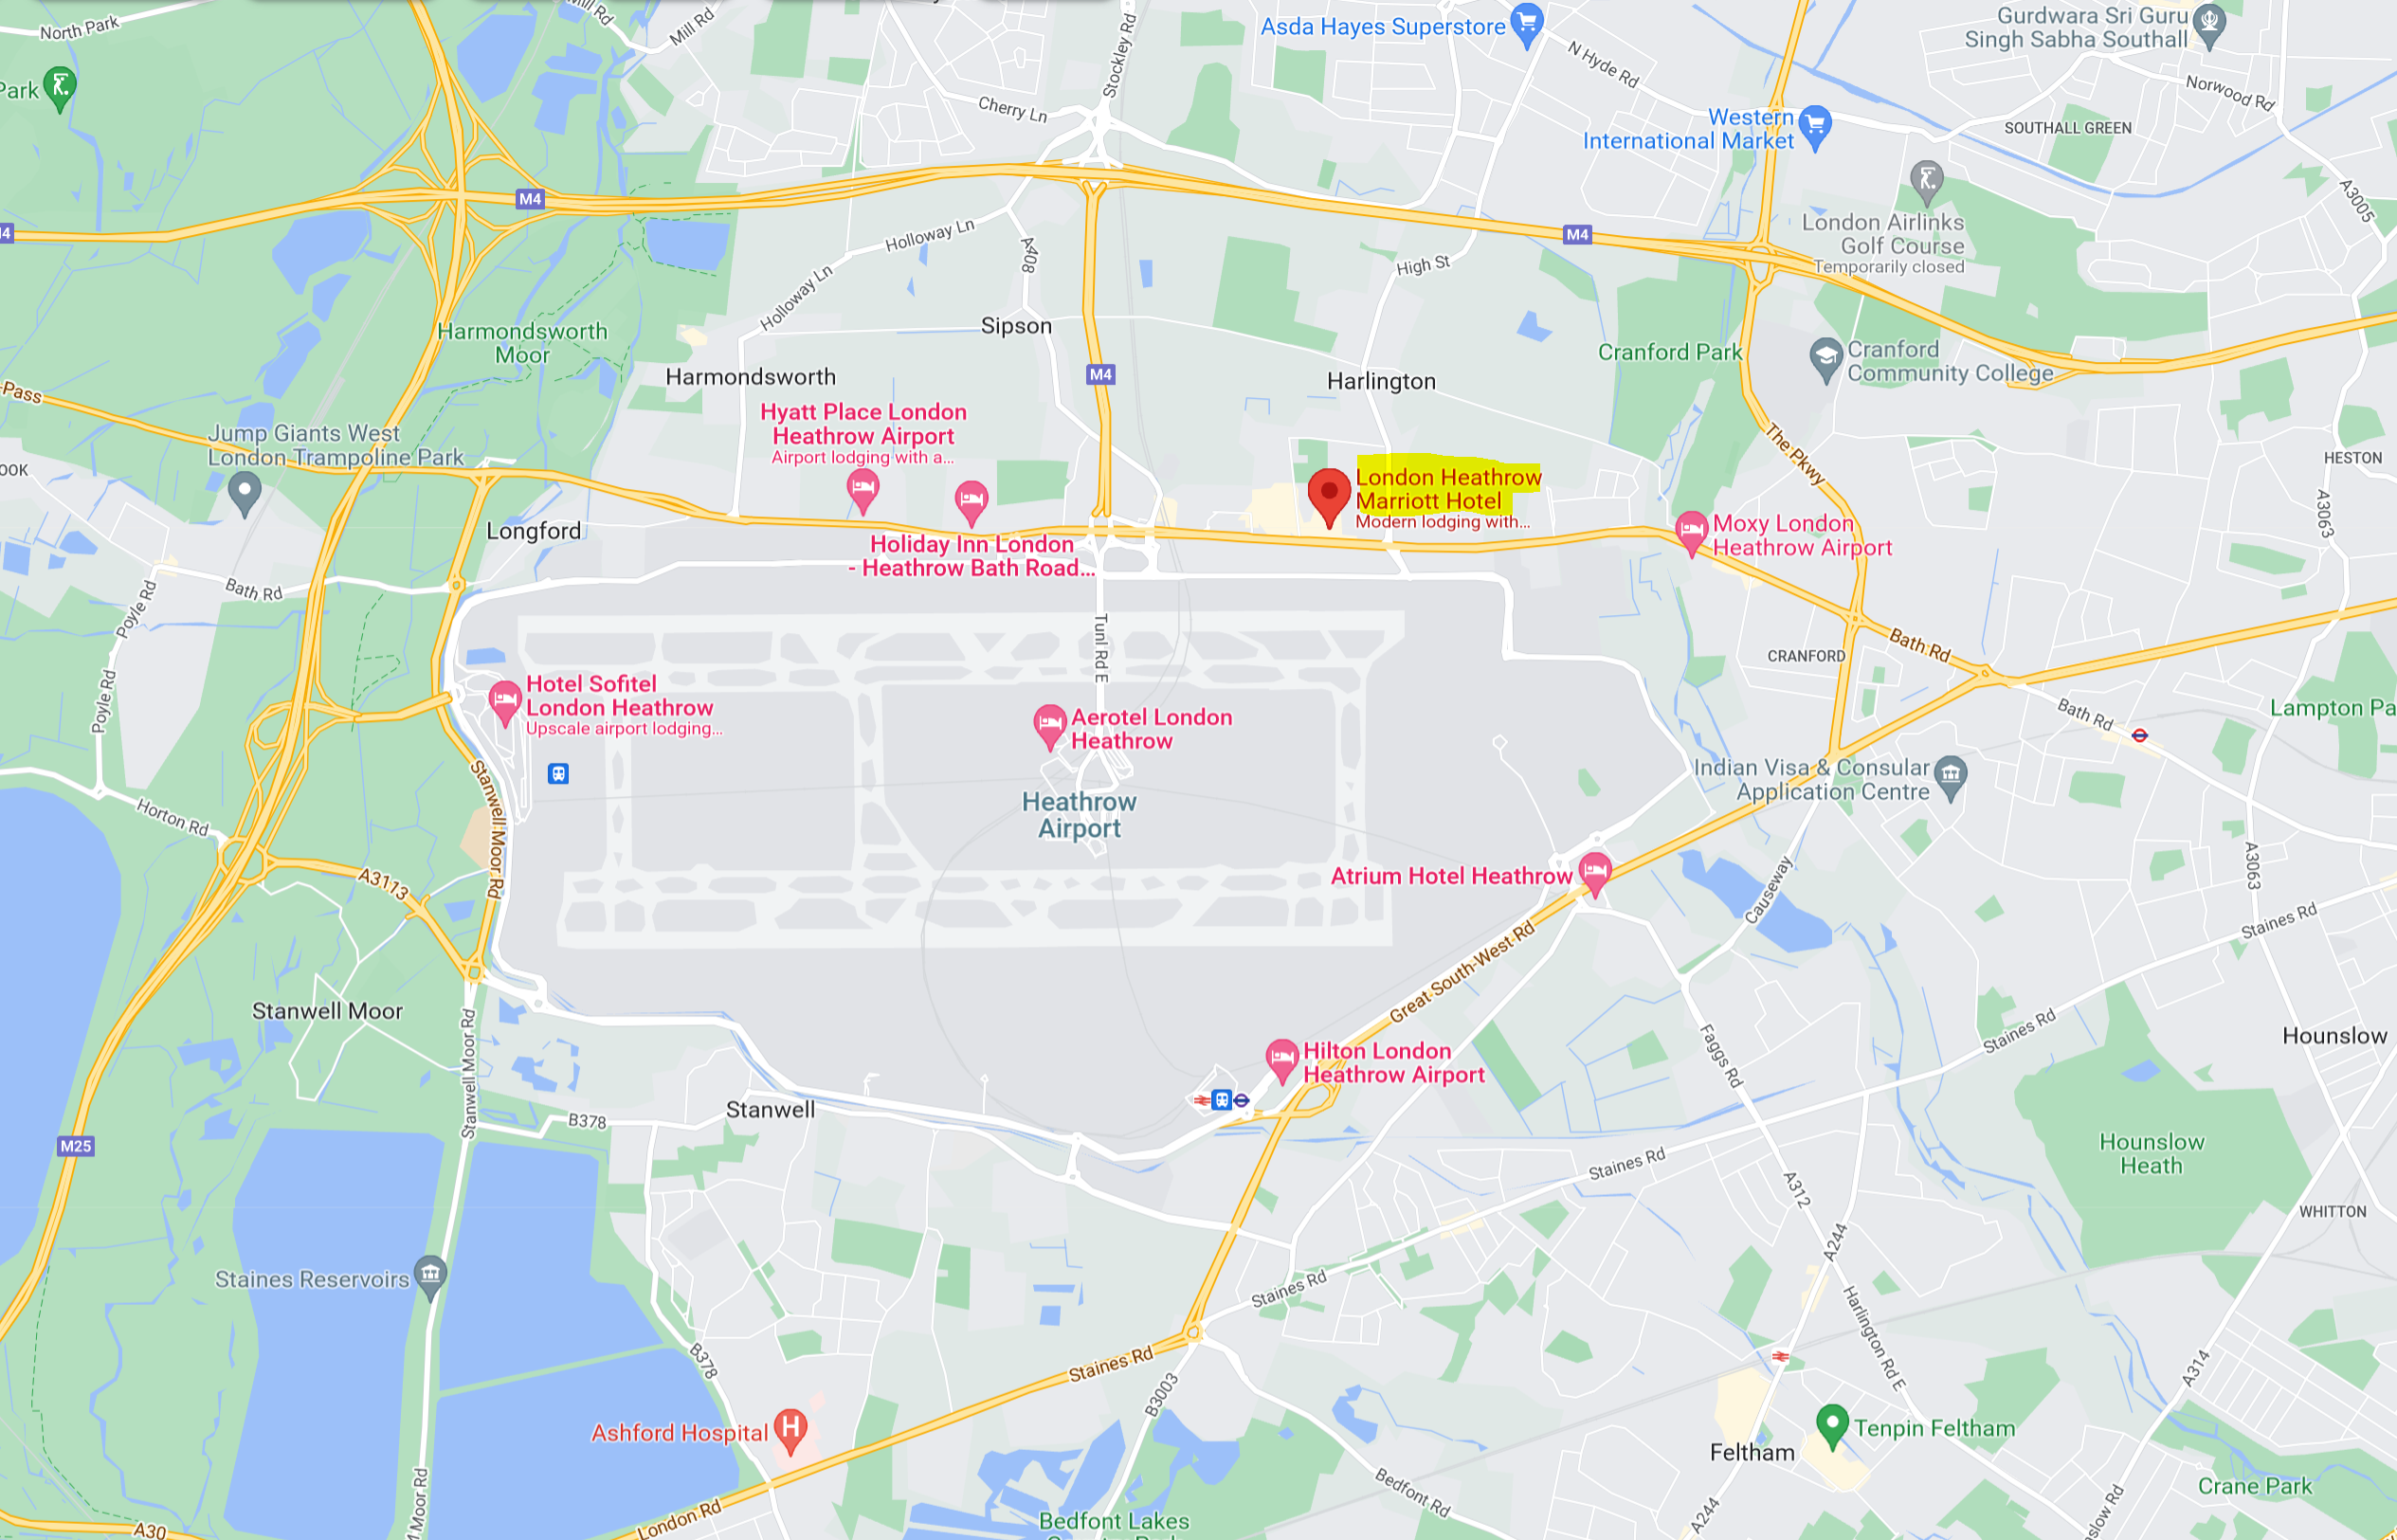 How To Get Between Terminals at London Heathrow Airport [LHR]